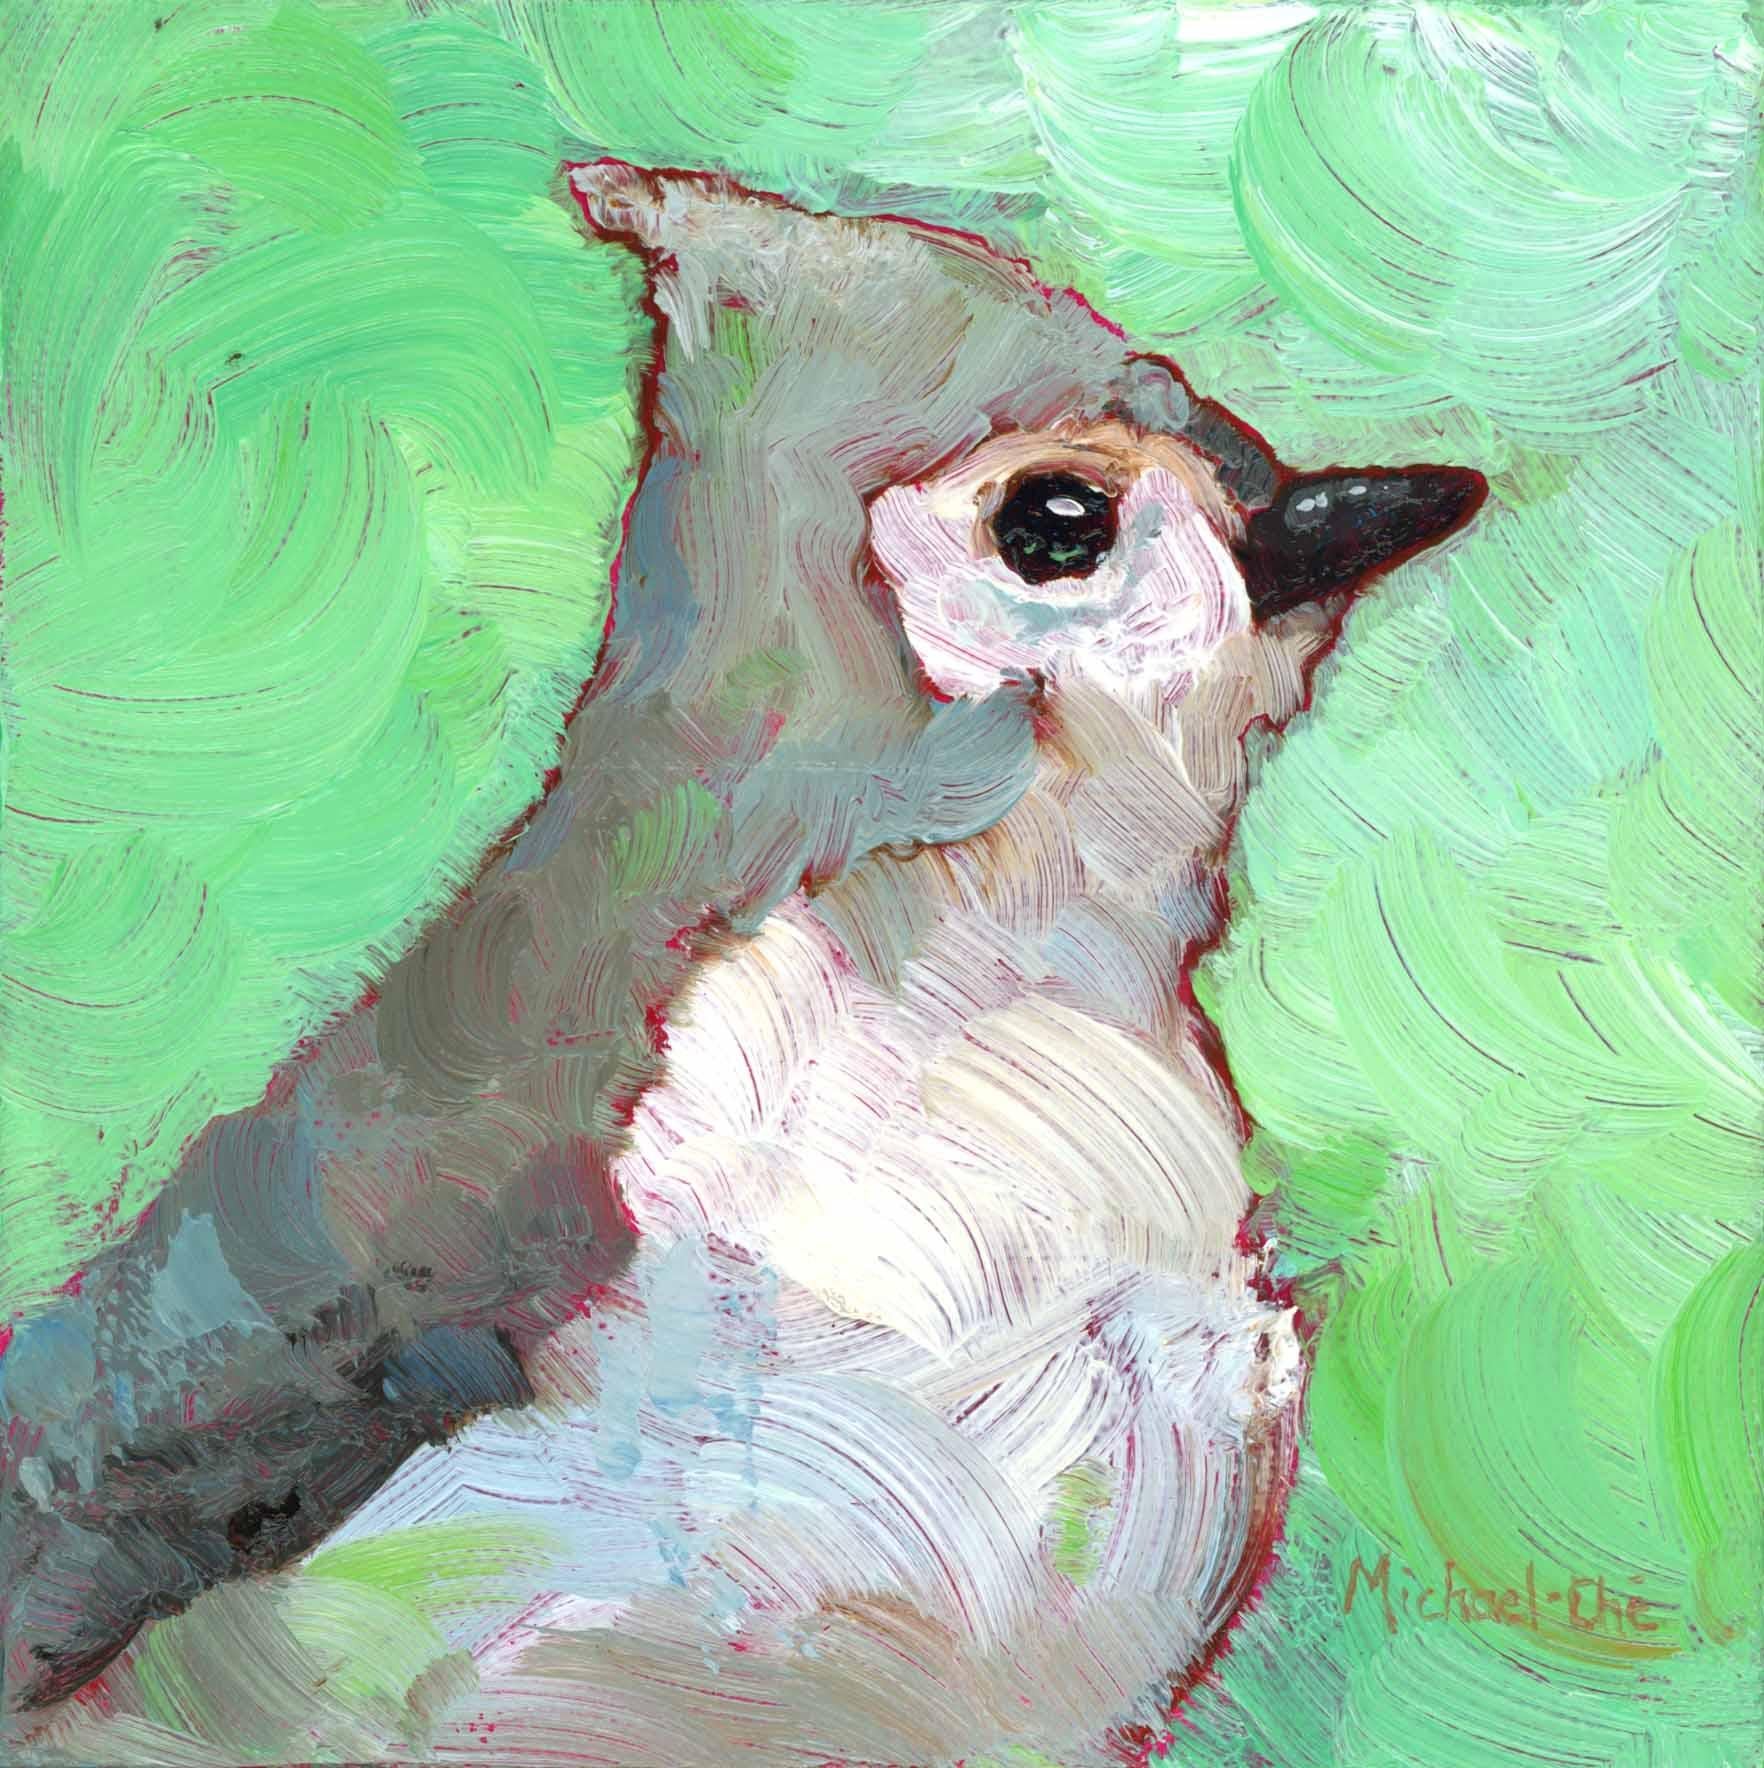 Michael-Che Swisher Animal Painting - "Tuftie" Small Oil Painting of a Grey Bird on Bright Green Background